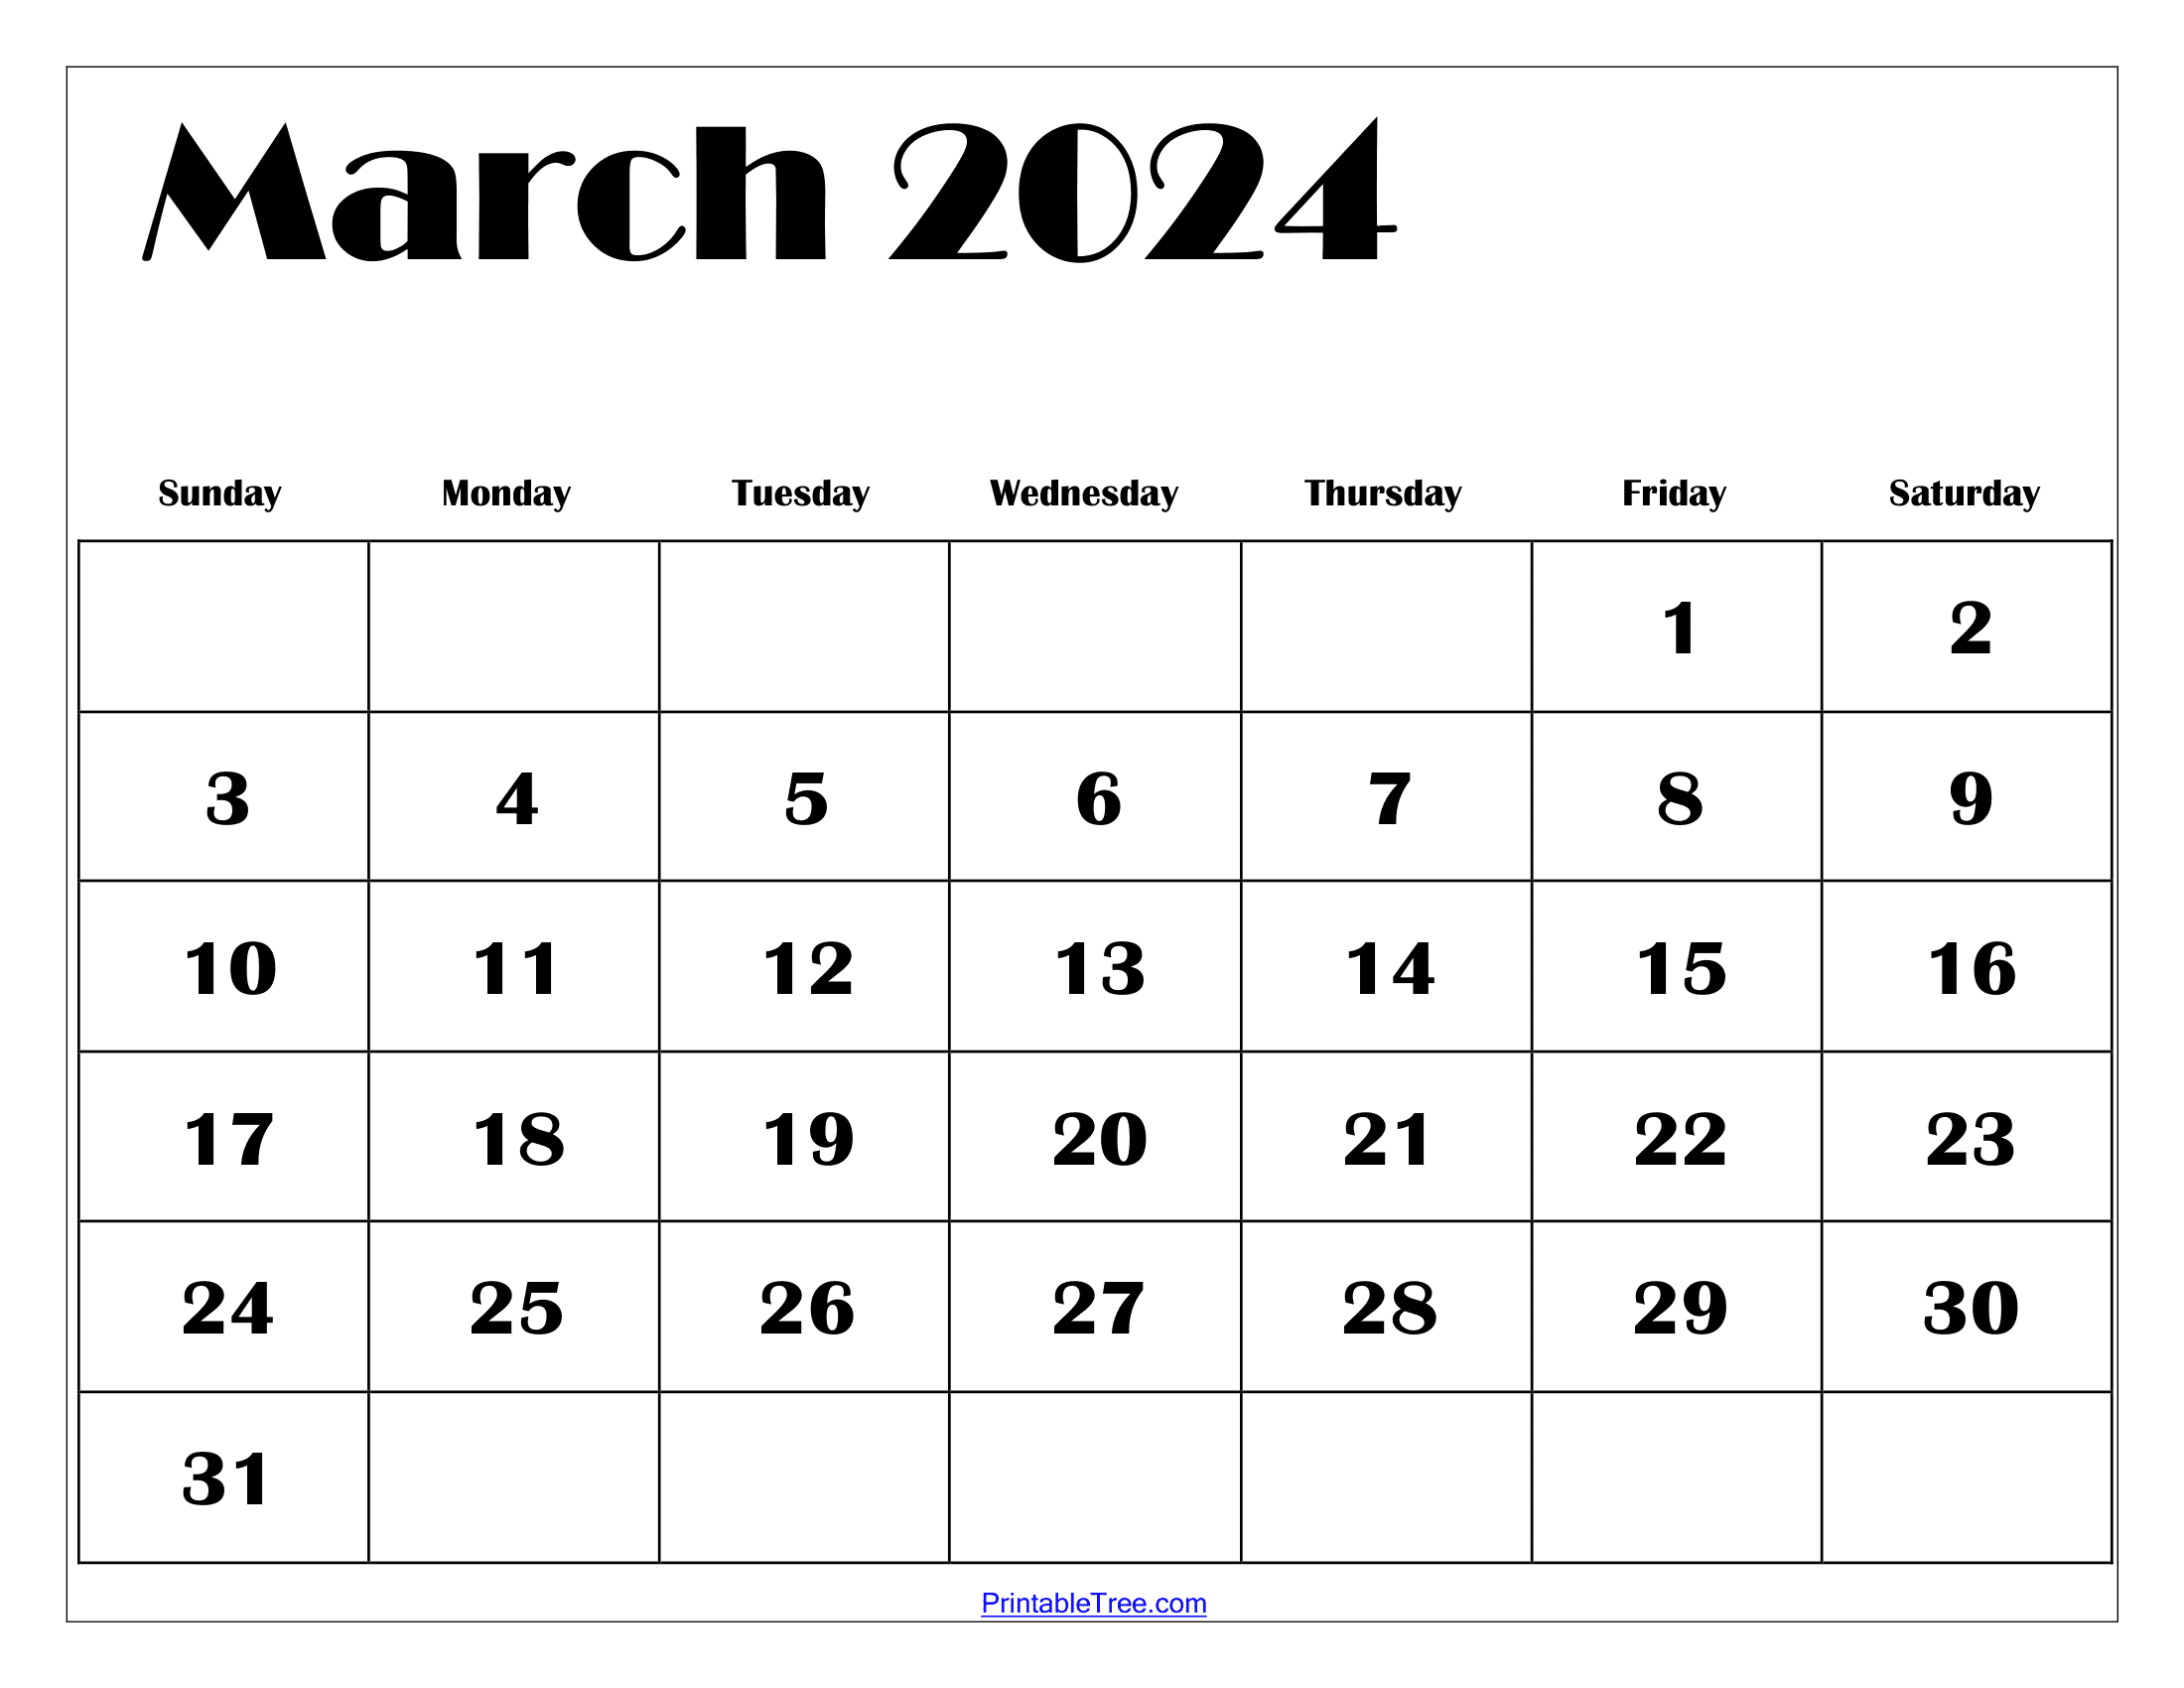 March 2024 Calendar Printable Pdf With Holidays Template Free for Free March Calendar 2024 Printable